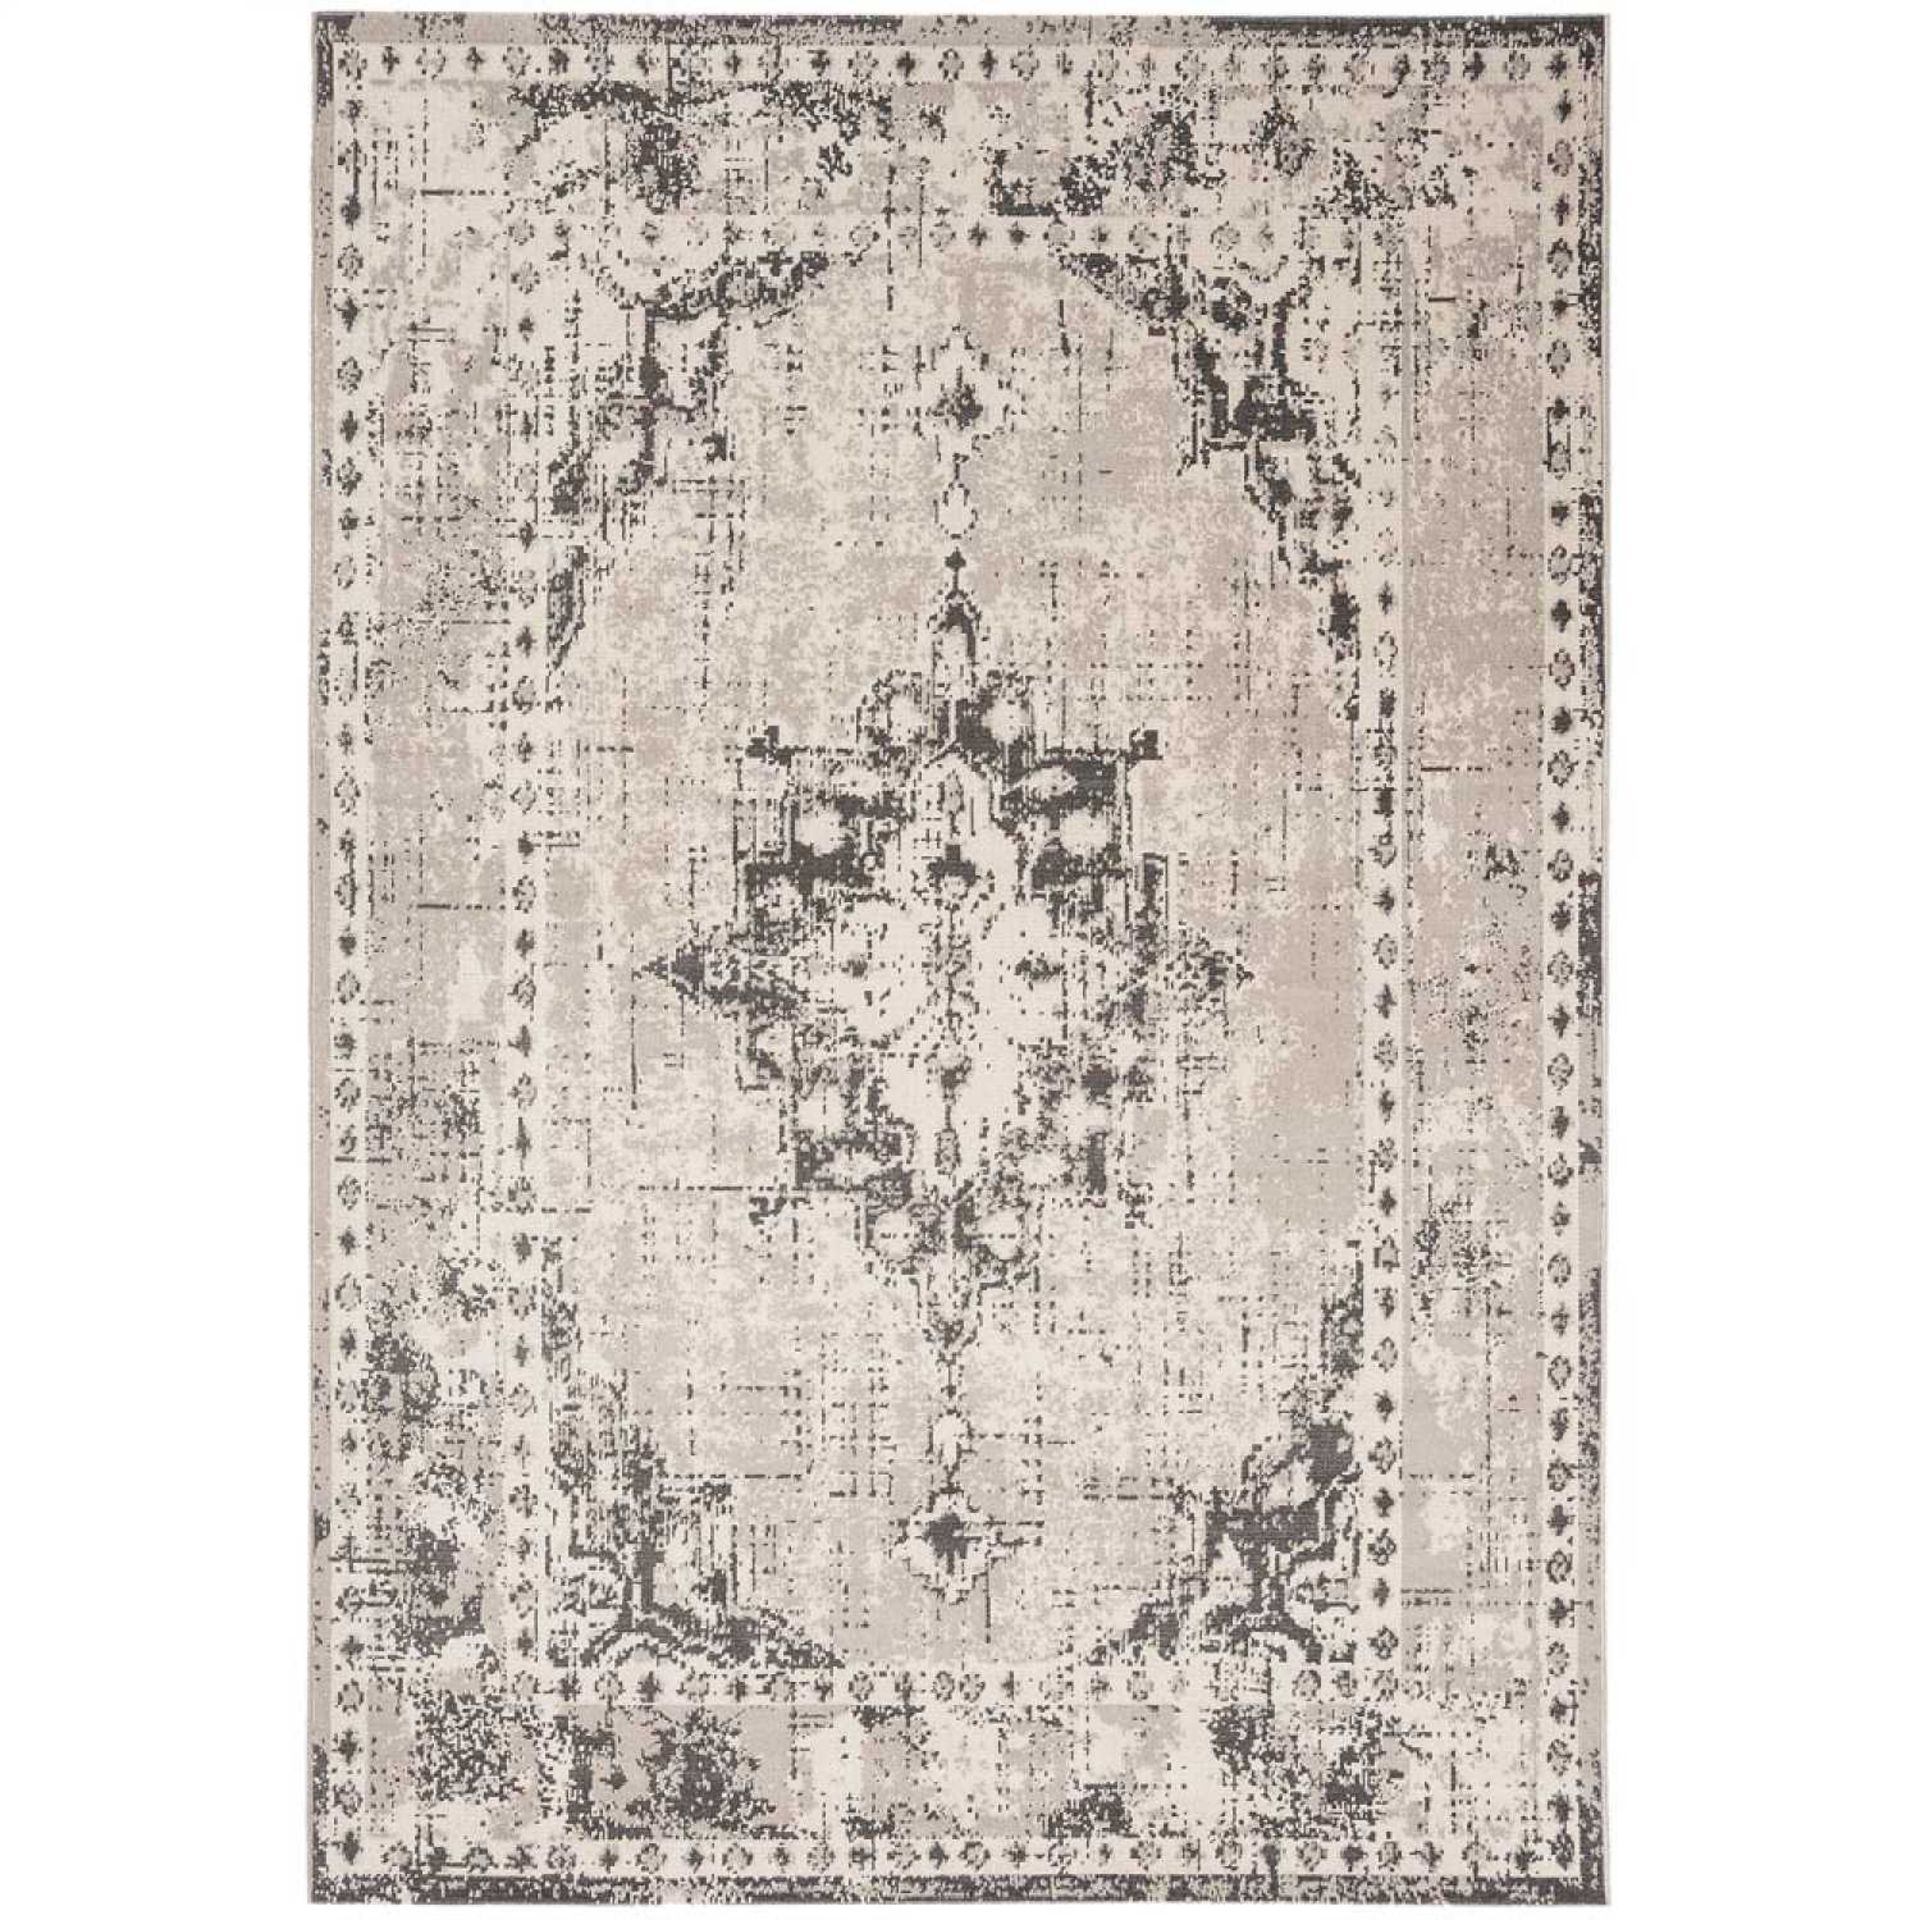 1 x Asiatic London 'Revive' Medallion Rug In Grey (RE02) - Dimensions: 200x290cm - Power Loomed In - Image 2 of 3